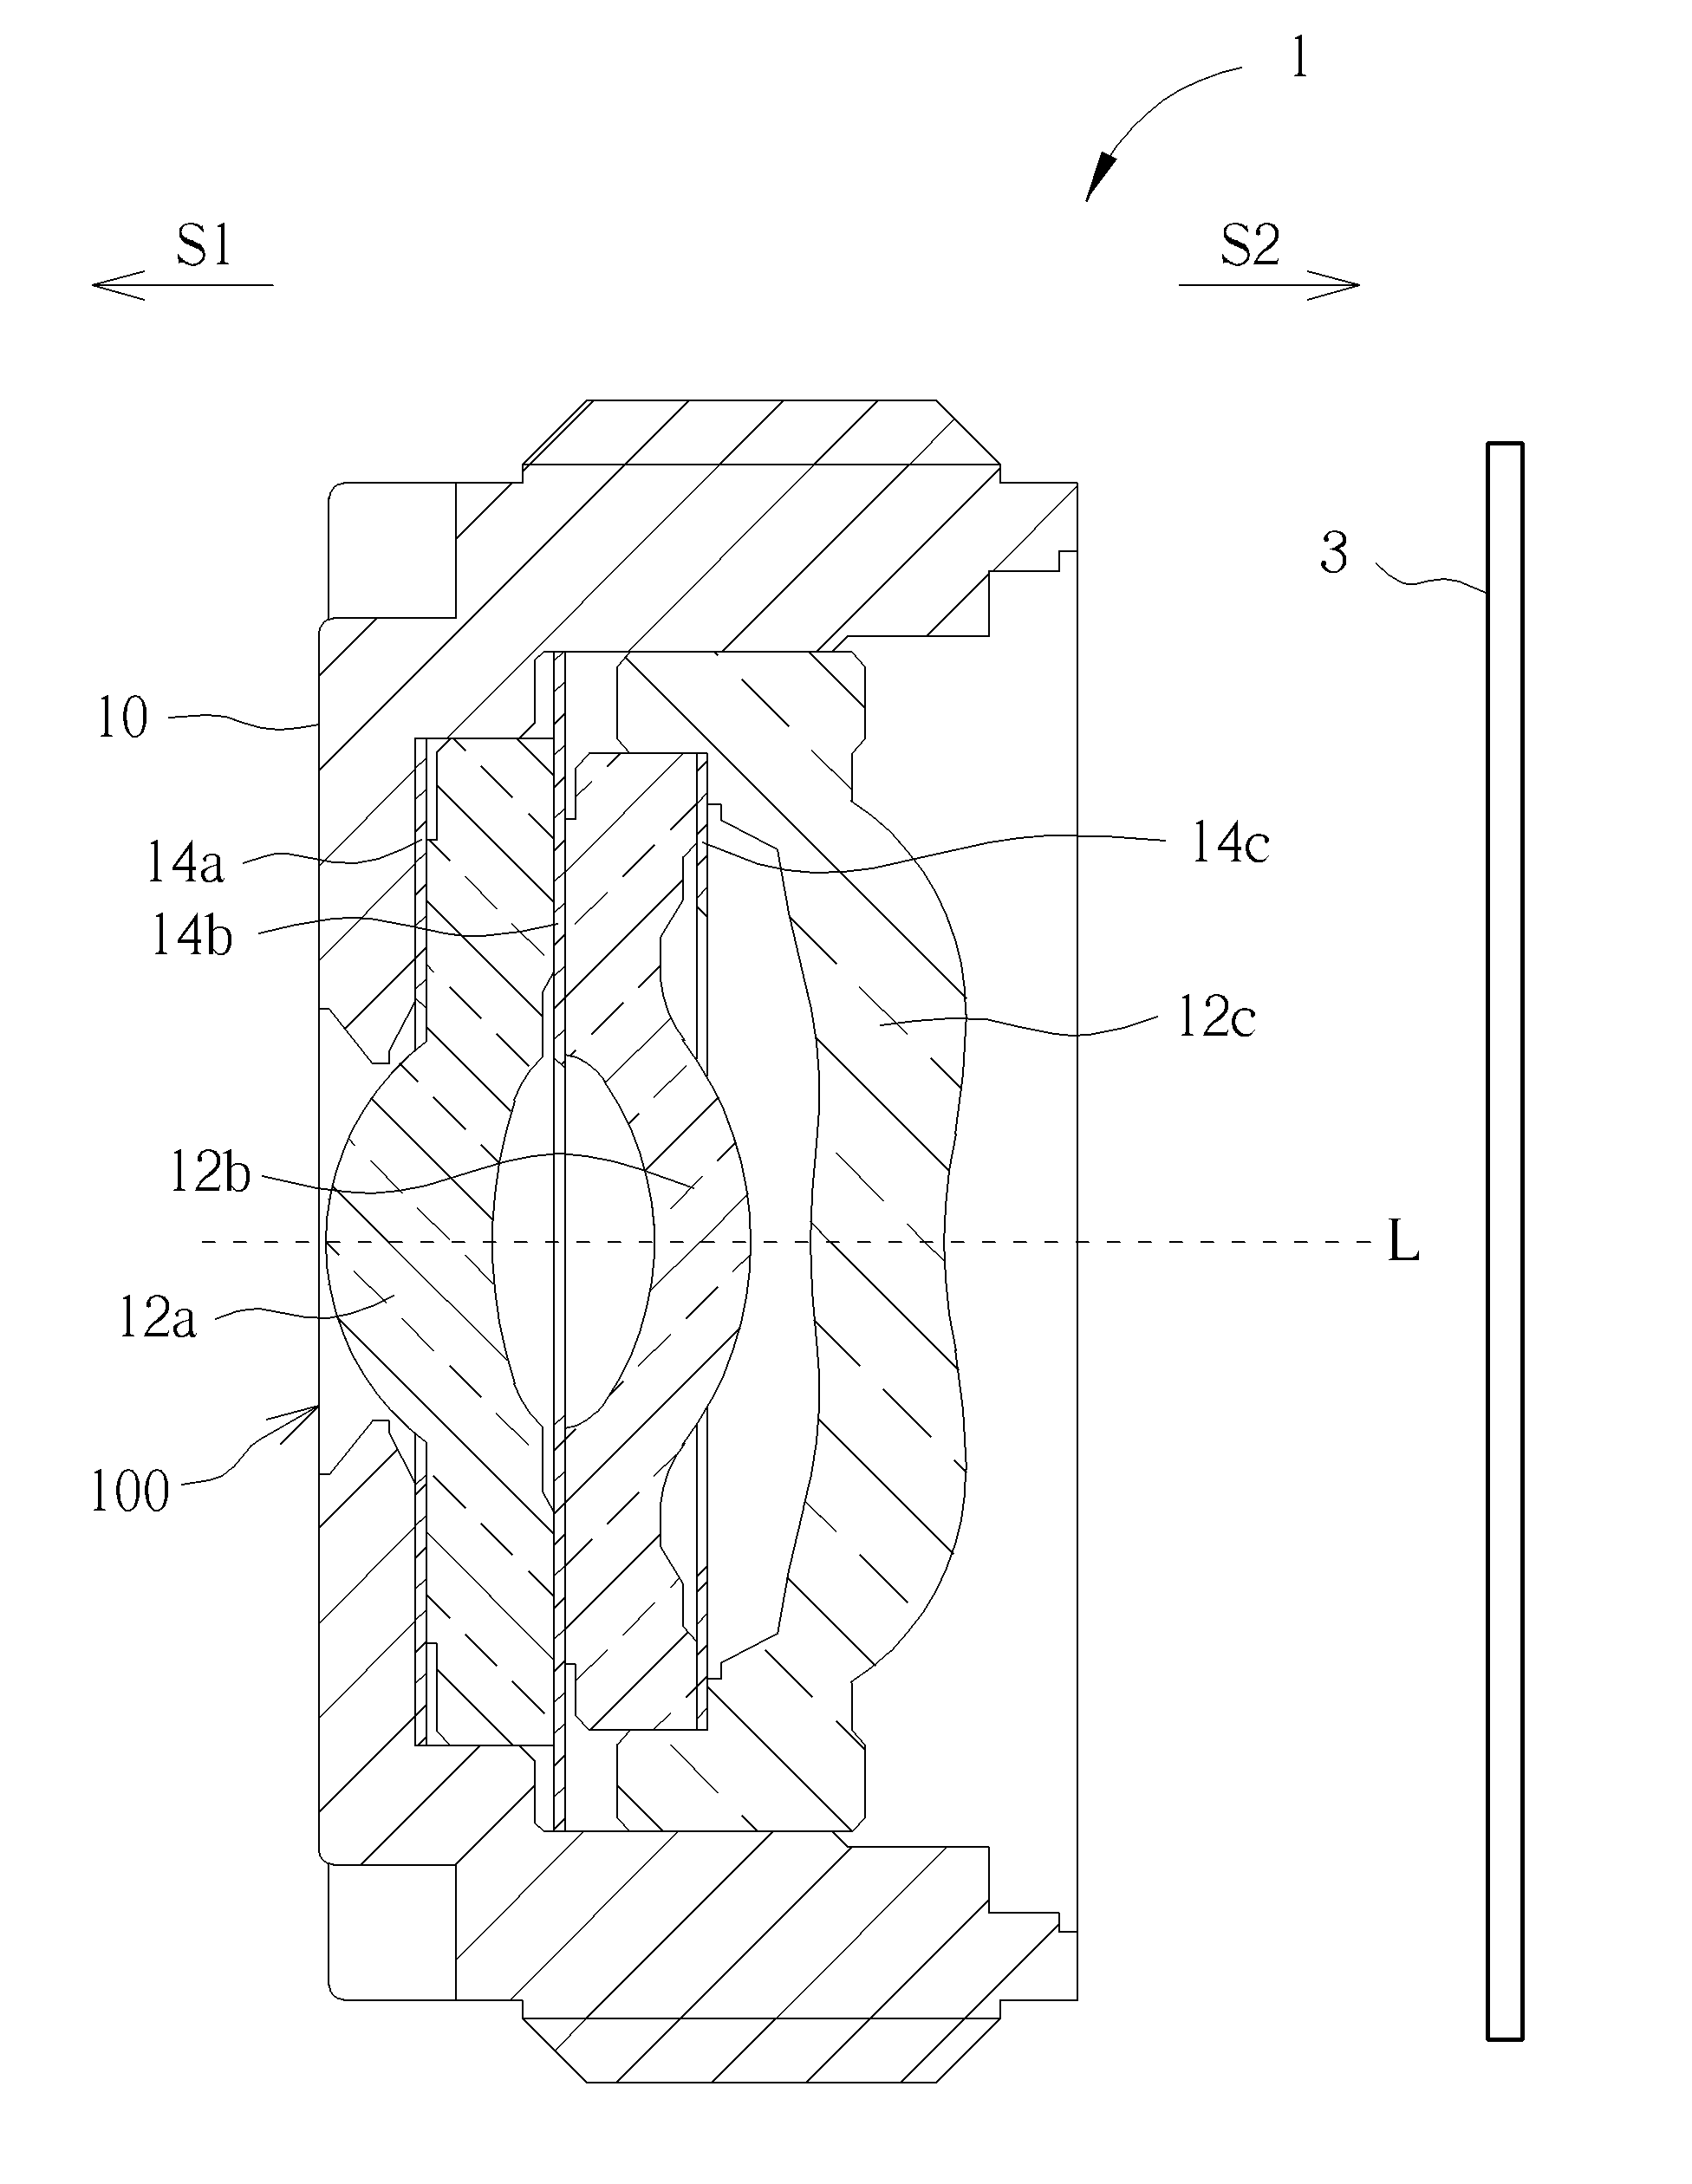 Imaging lens and spacer adapted to imaging lens